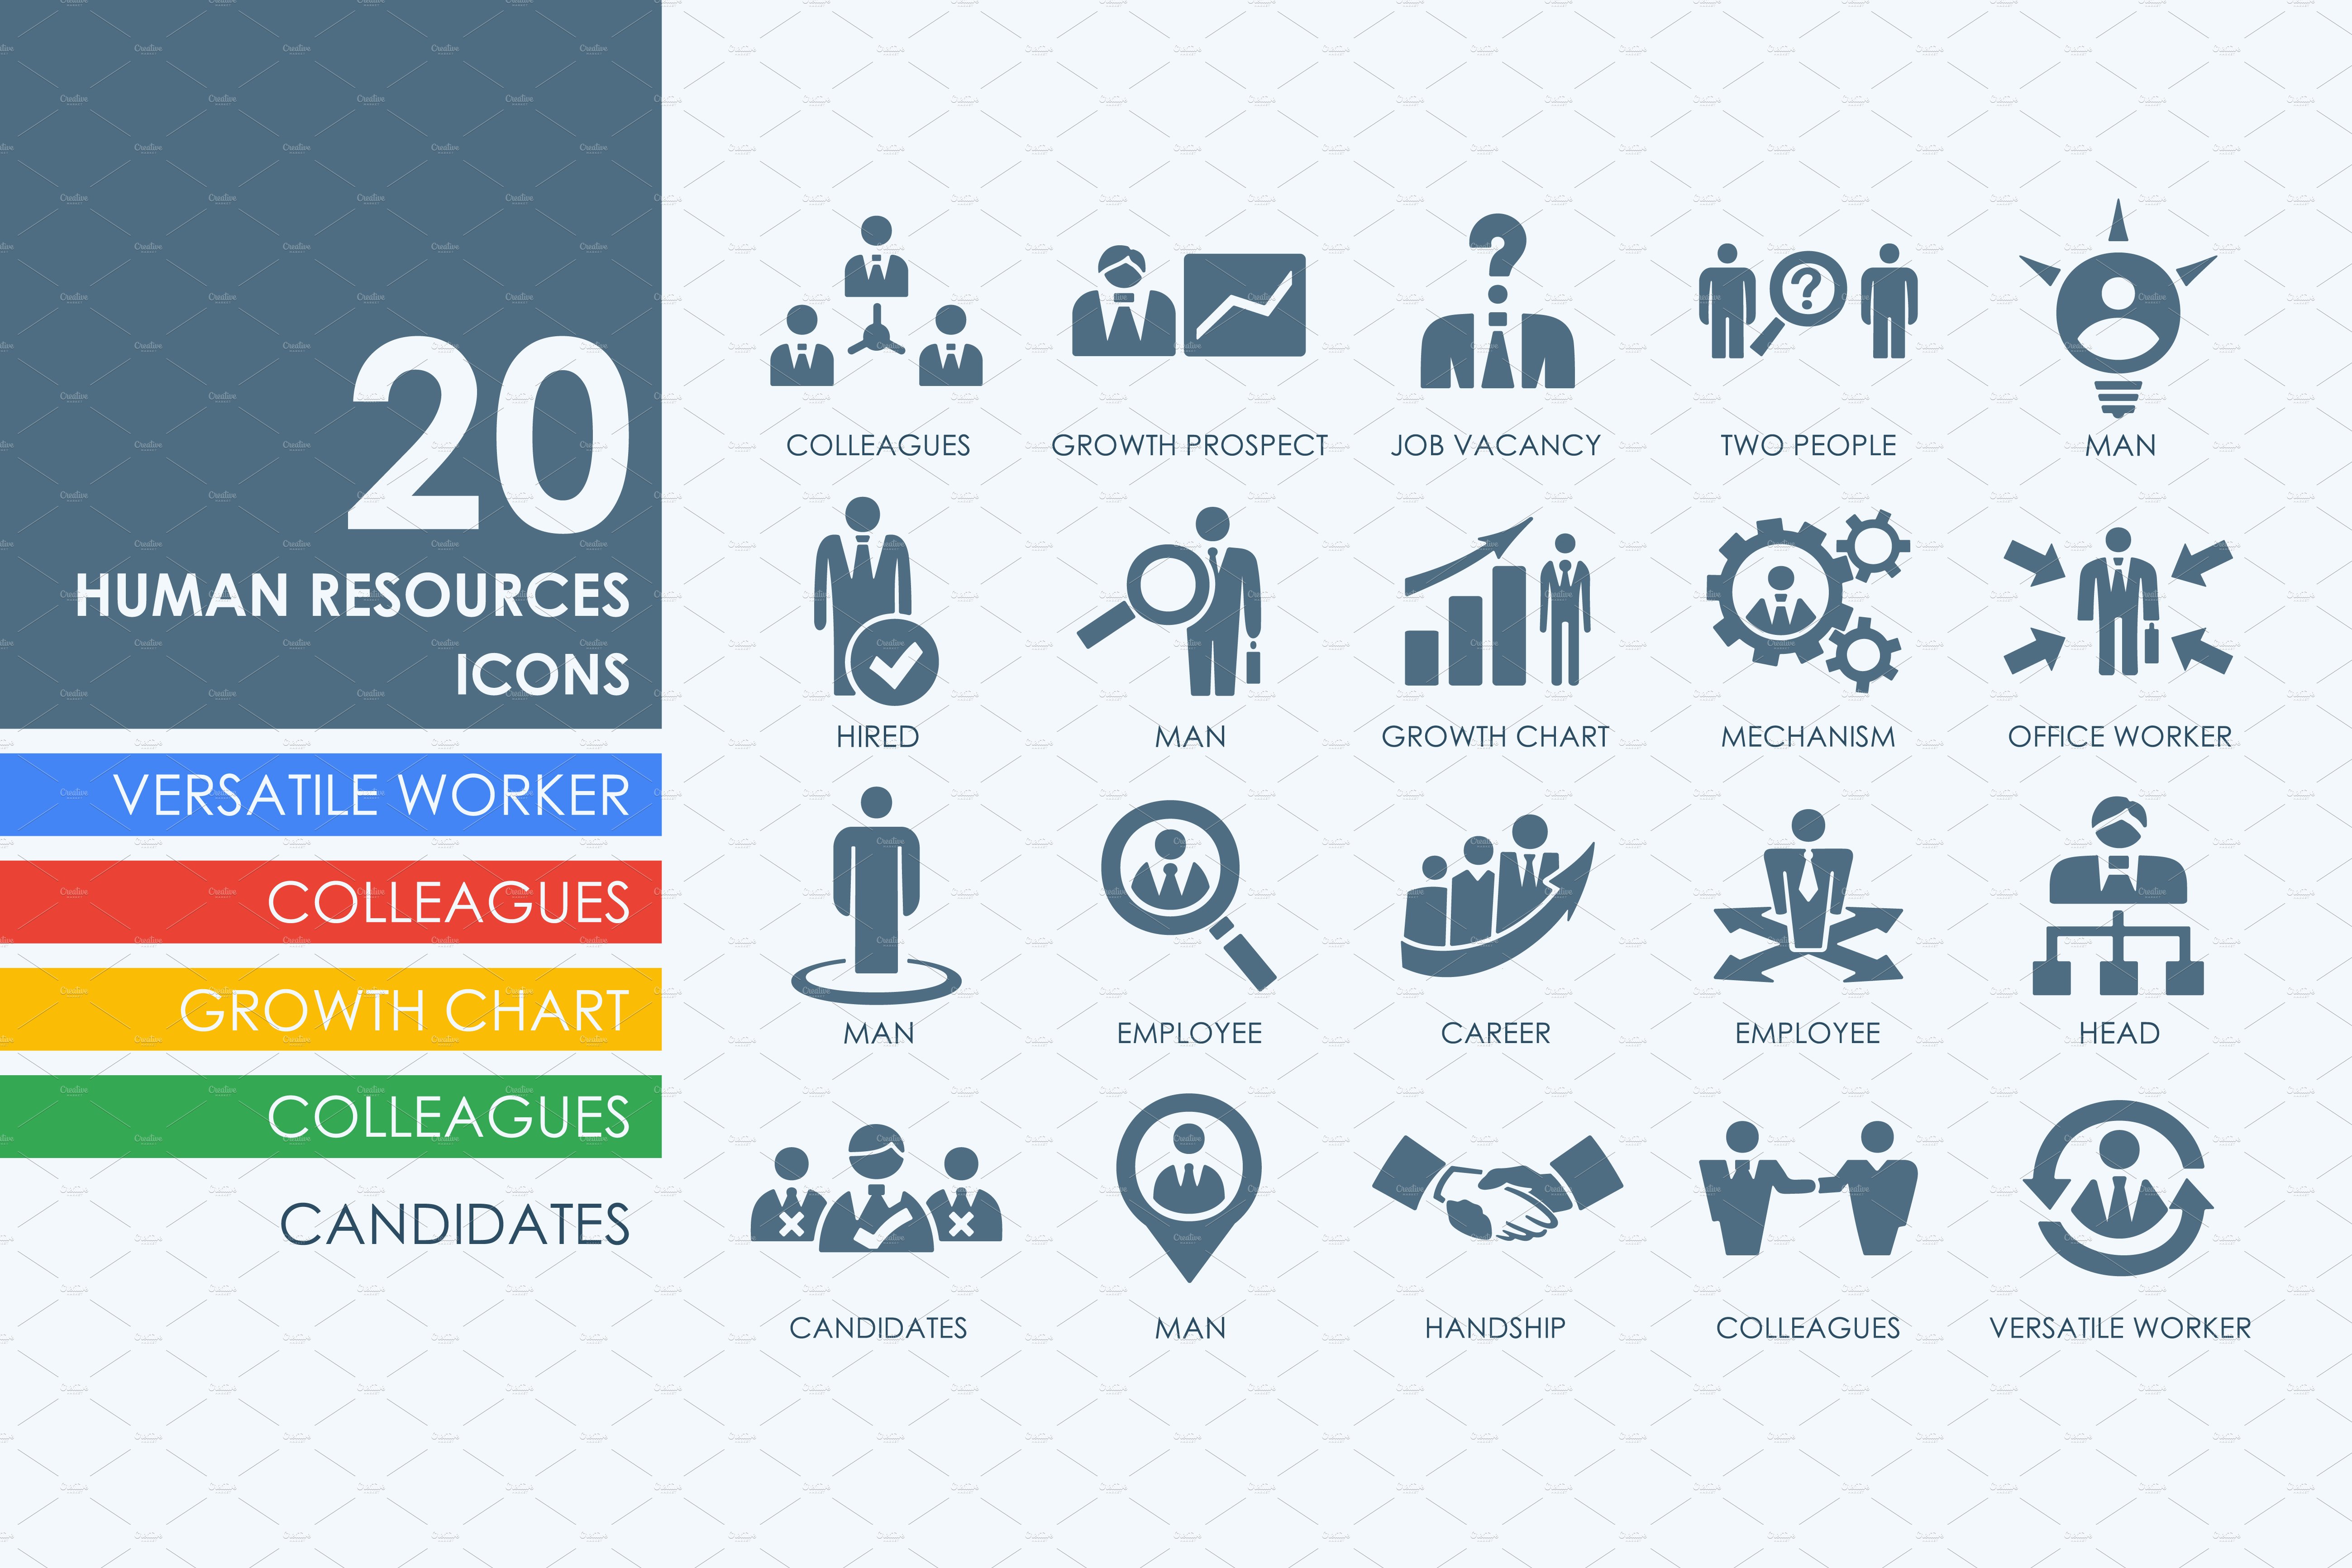 20 human resources icons cover image.